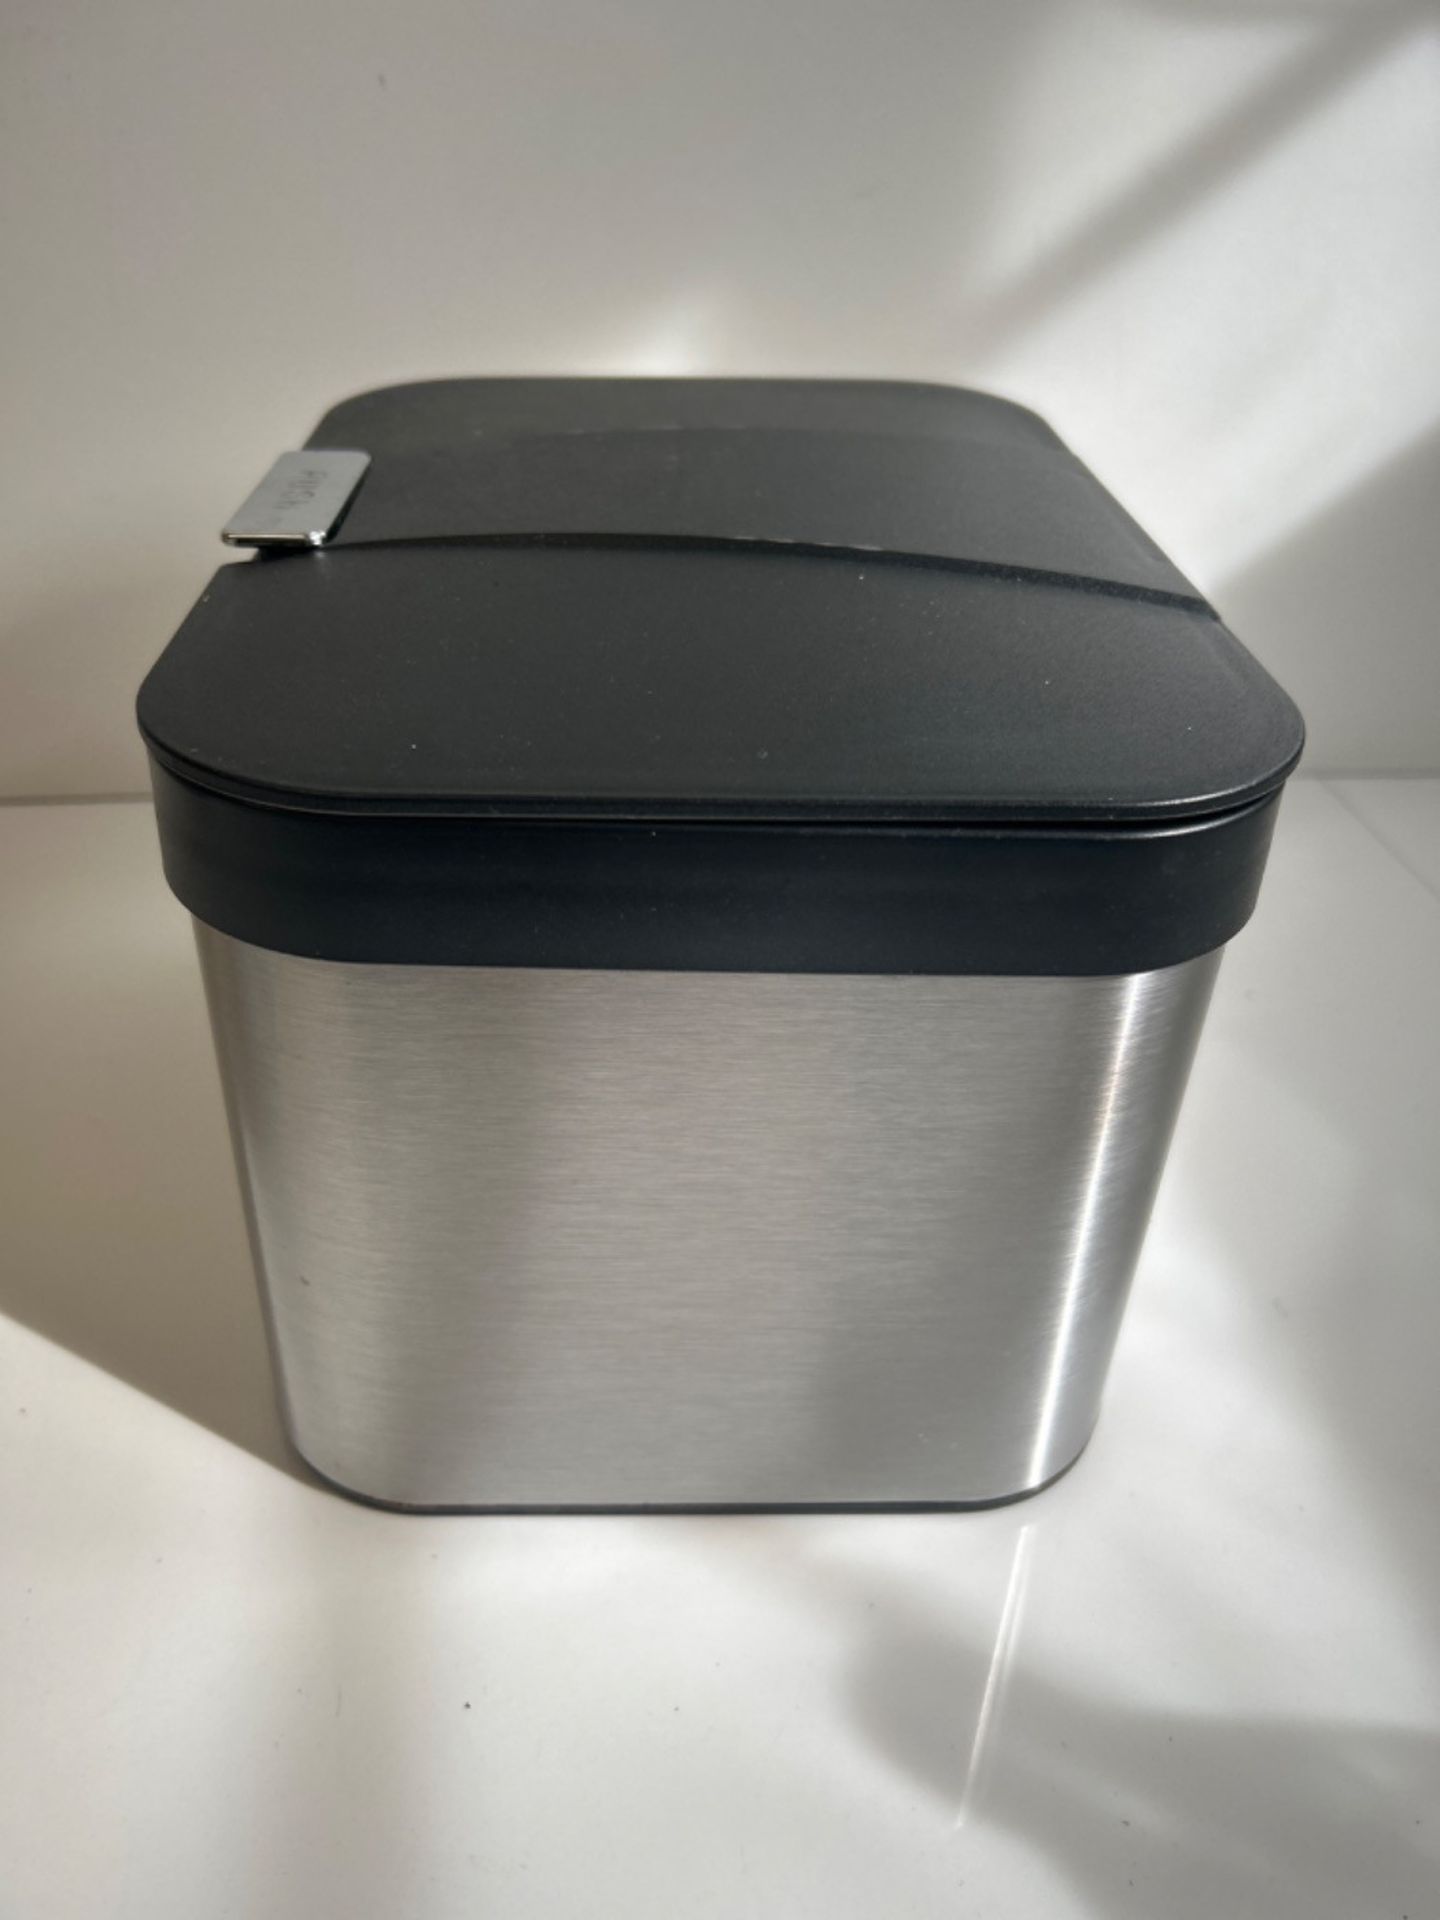 Ibergrif - Kitchen Food Waste Caddy, Countertop Bin, Bathroom Bins With Lids - 4.3 Litres (25 X 18,. - Image 3 of 3